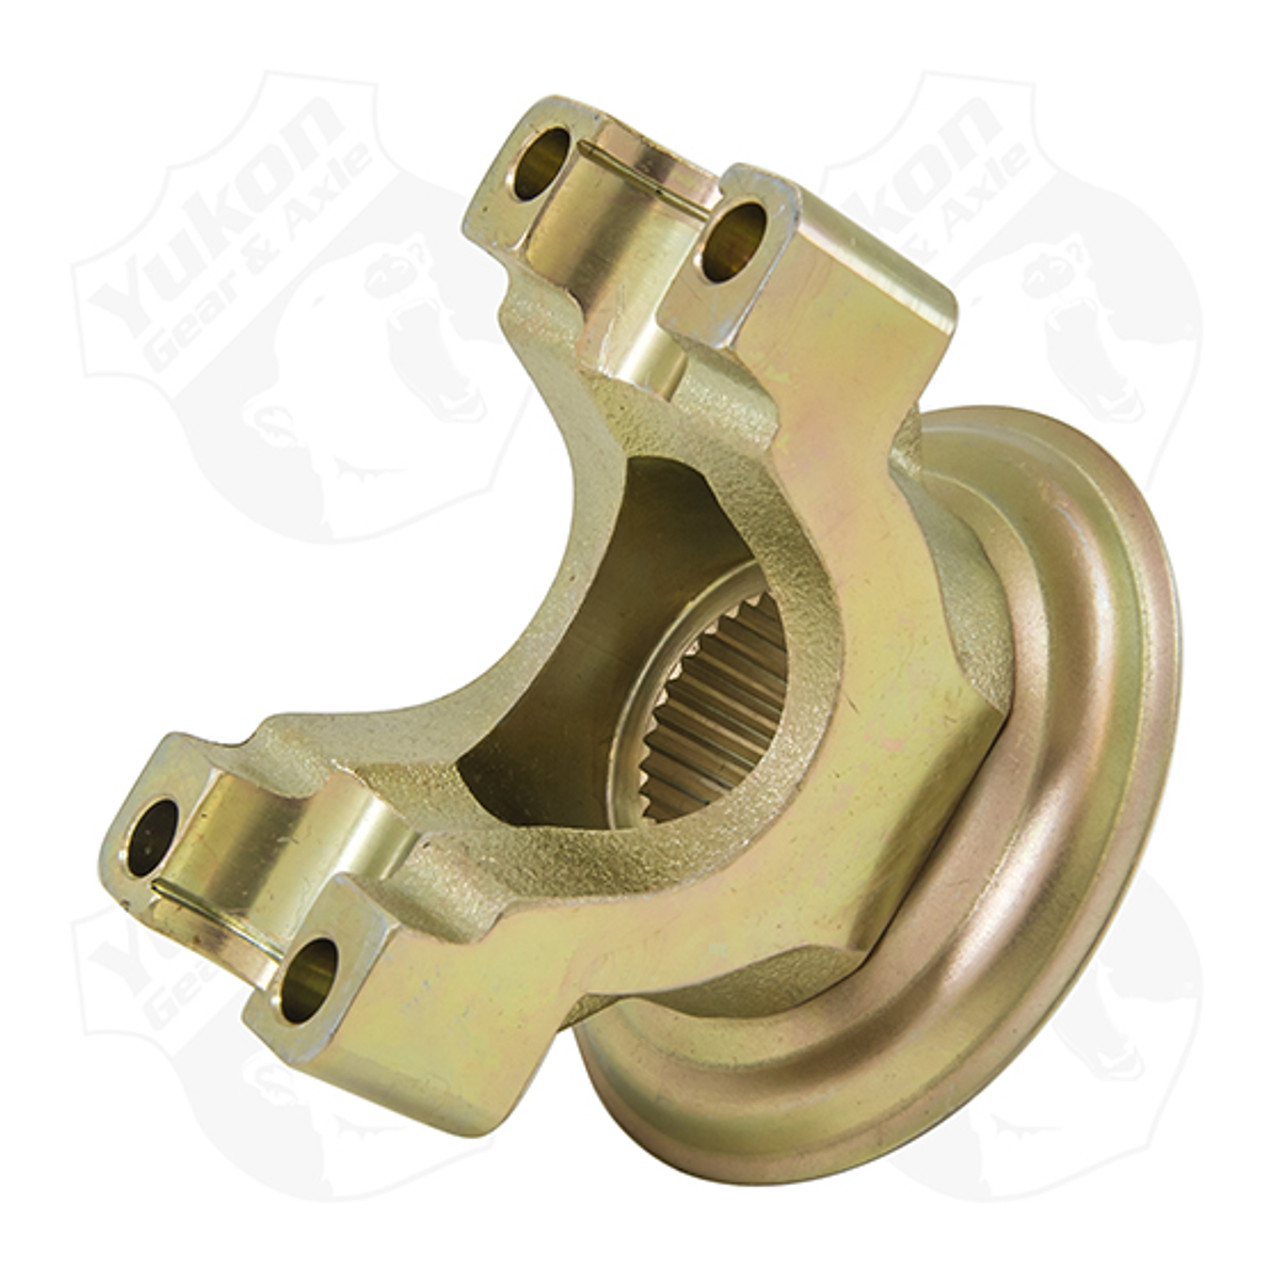 Yukon yoke for Ford 8.8" truck or passenger with a 1330 U/Joint size.